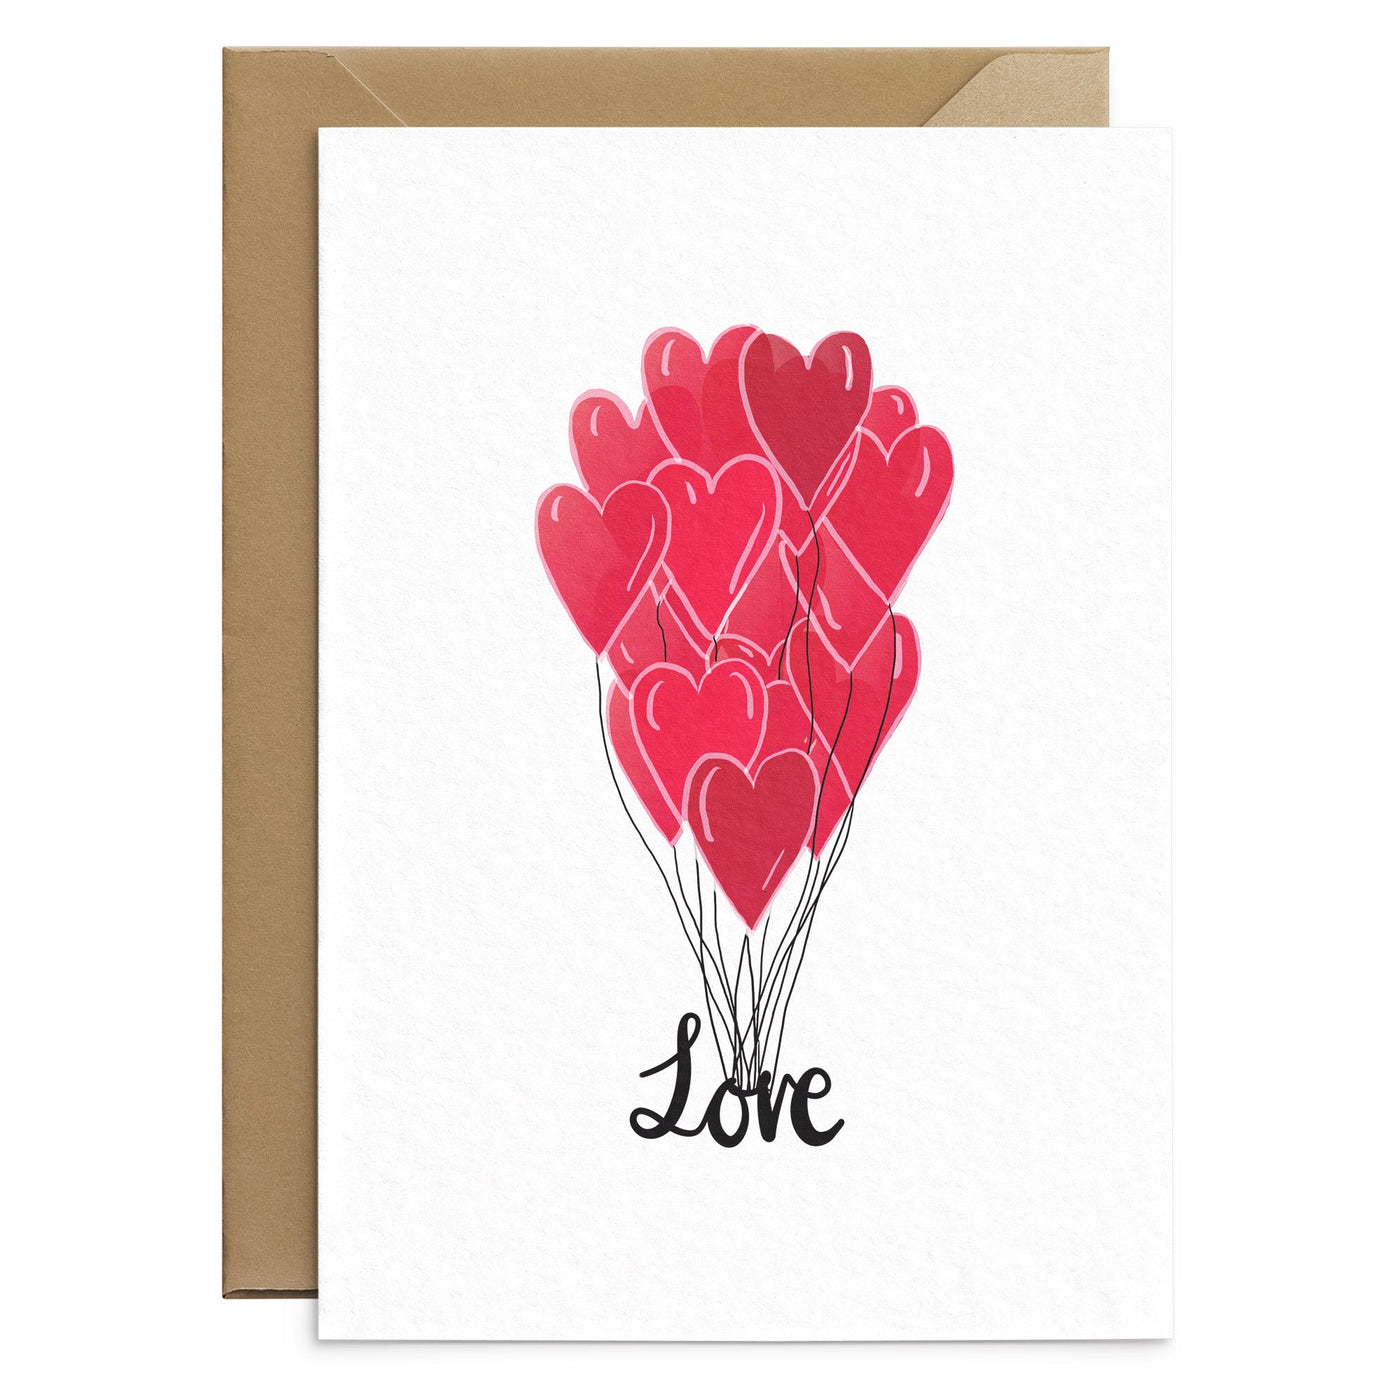 Love Balloons Card - Poppins & Co.